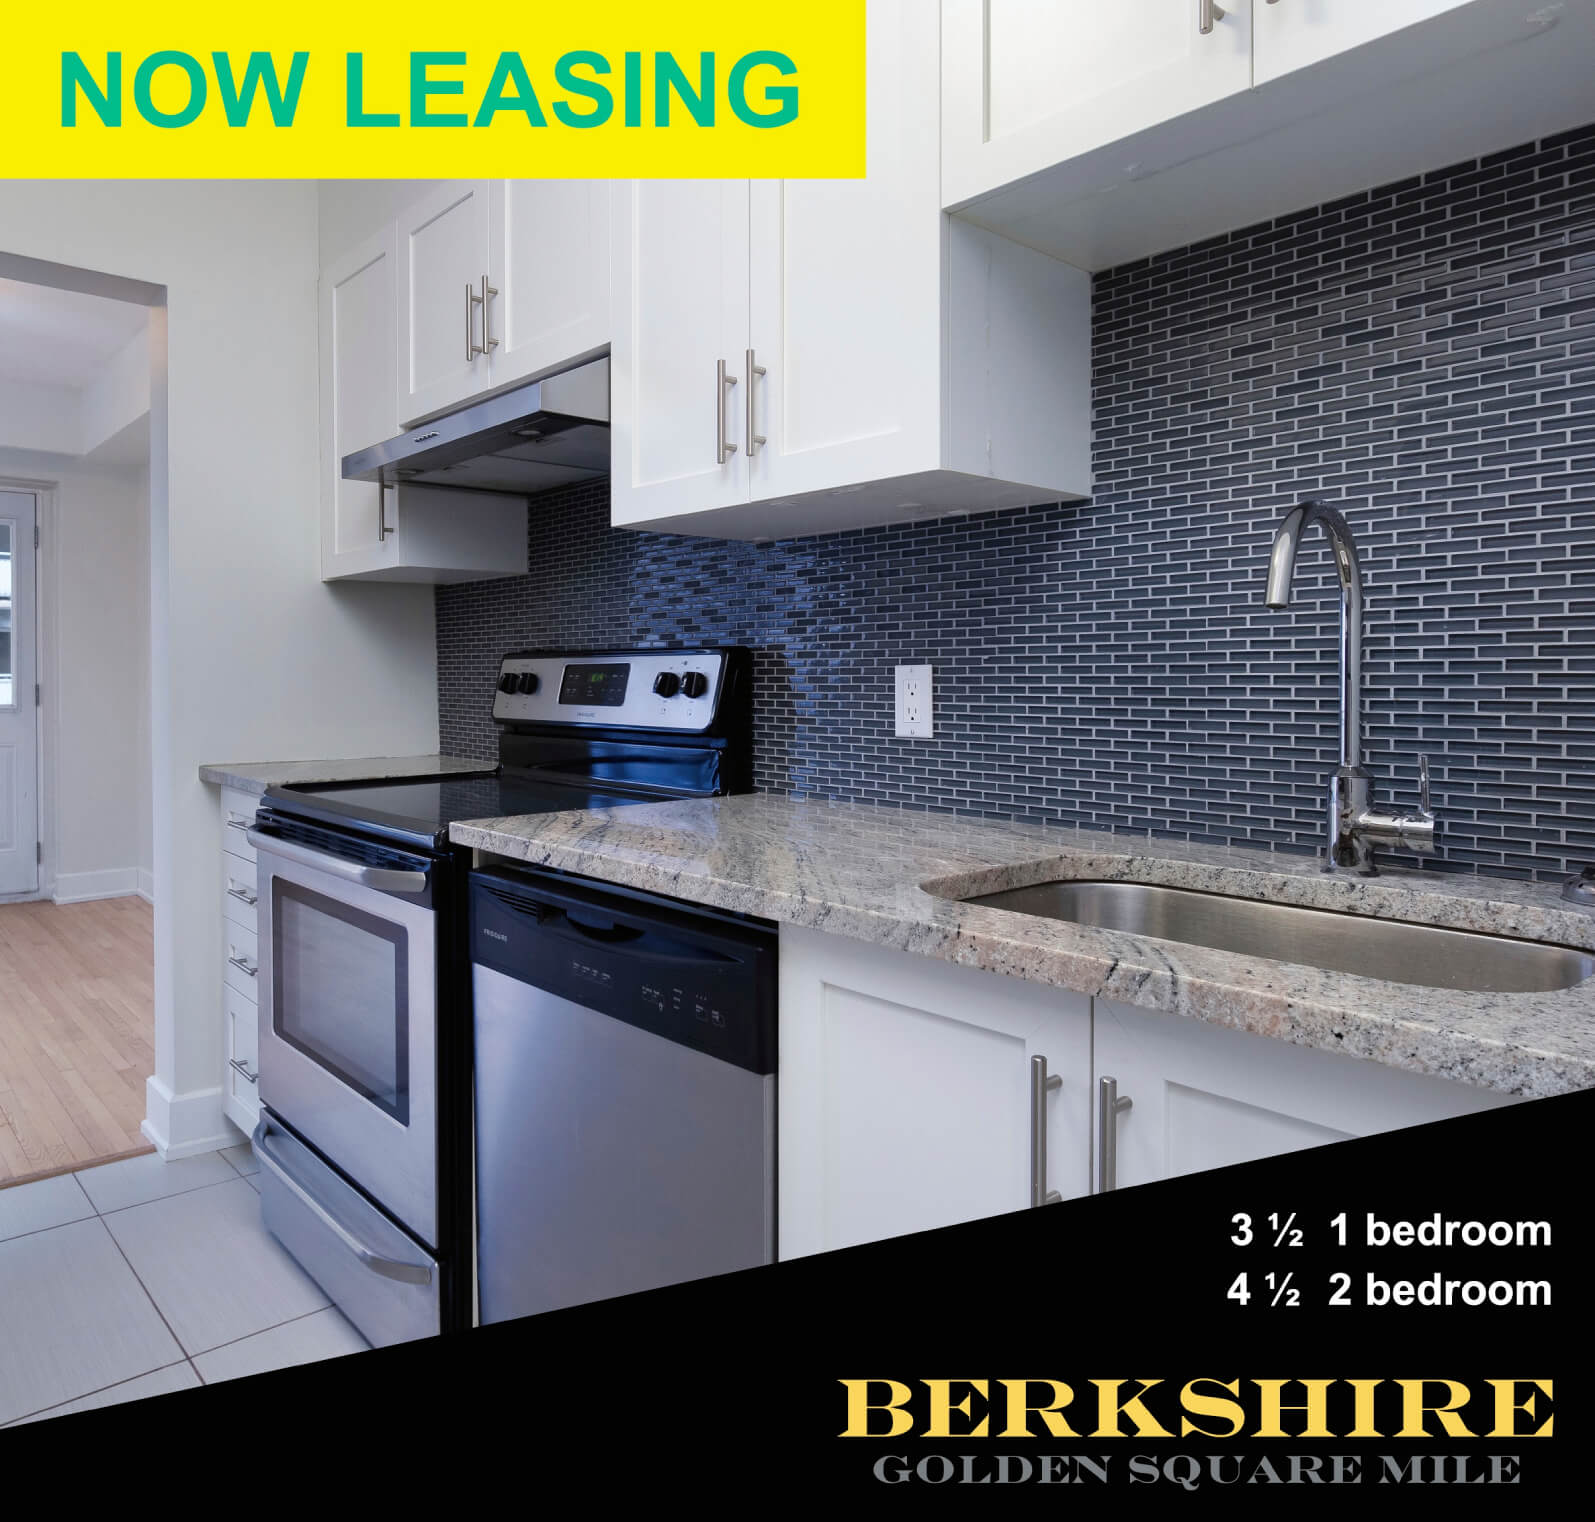 3 ½, 4 ½ apartments for lease - 514-573-2582 - Berkshire - Golden Square Mile